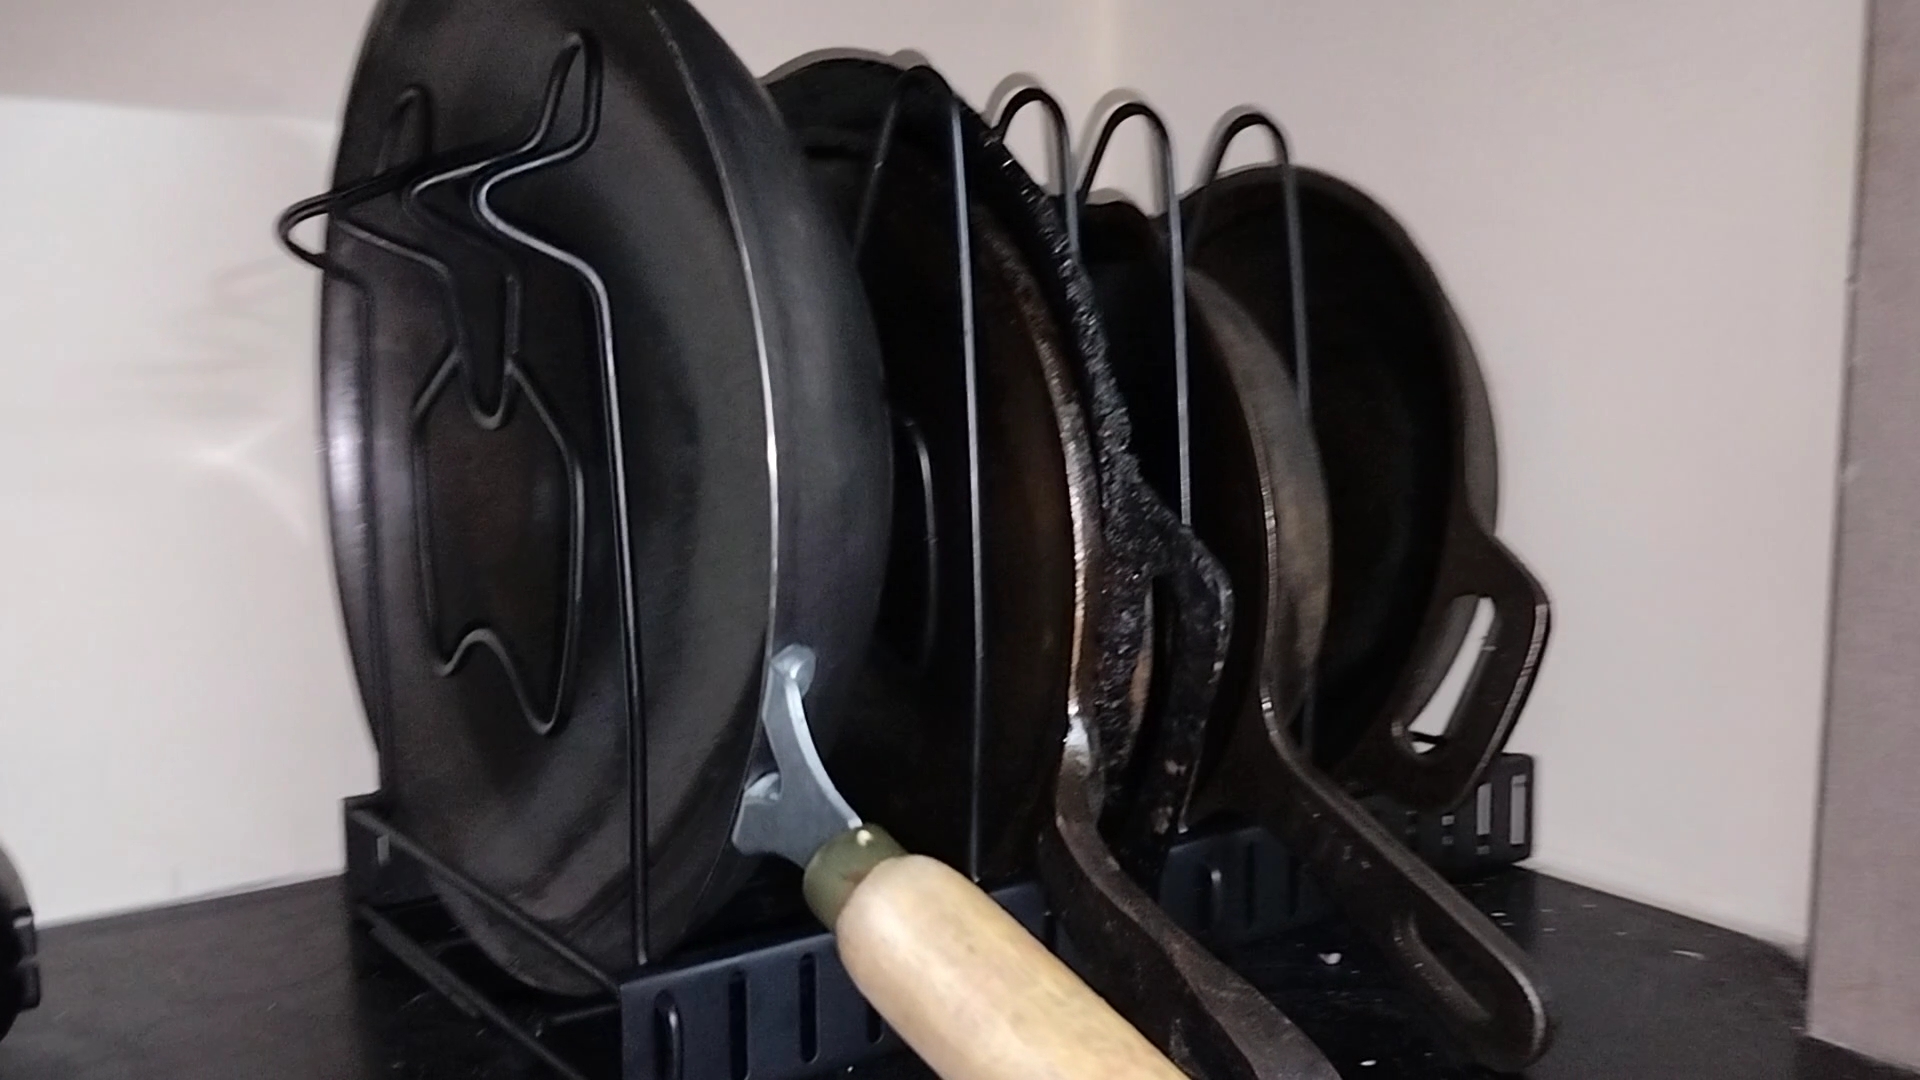 Axmon Kitchen Cabinet Cookware Organizer Stand Review